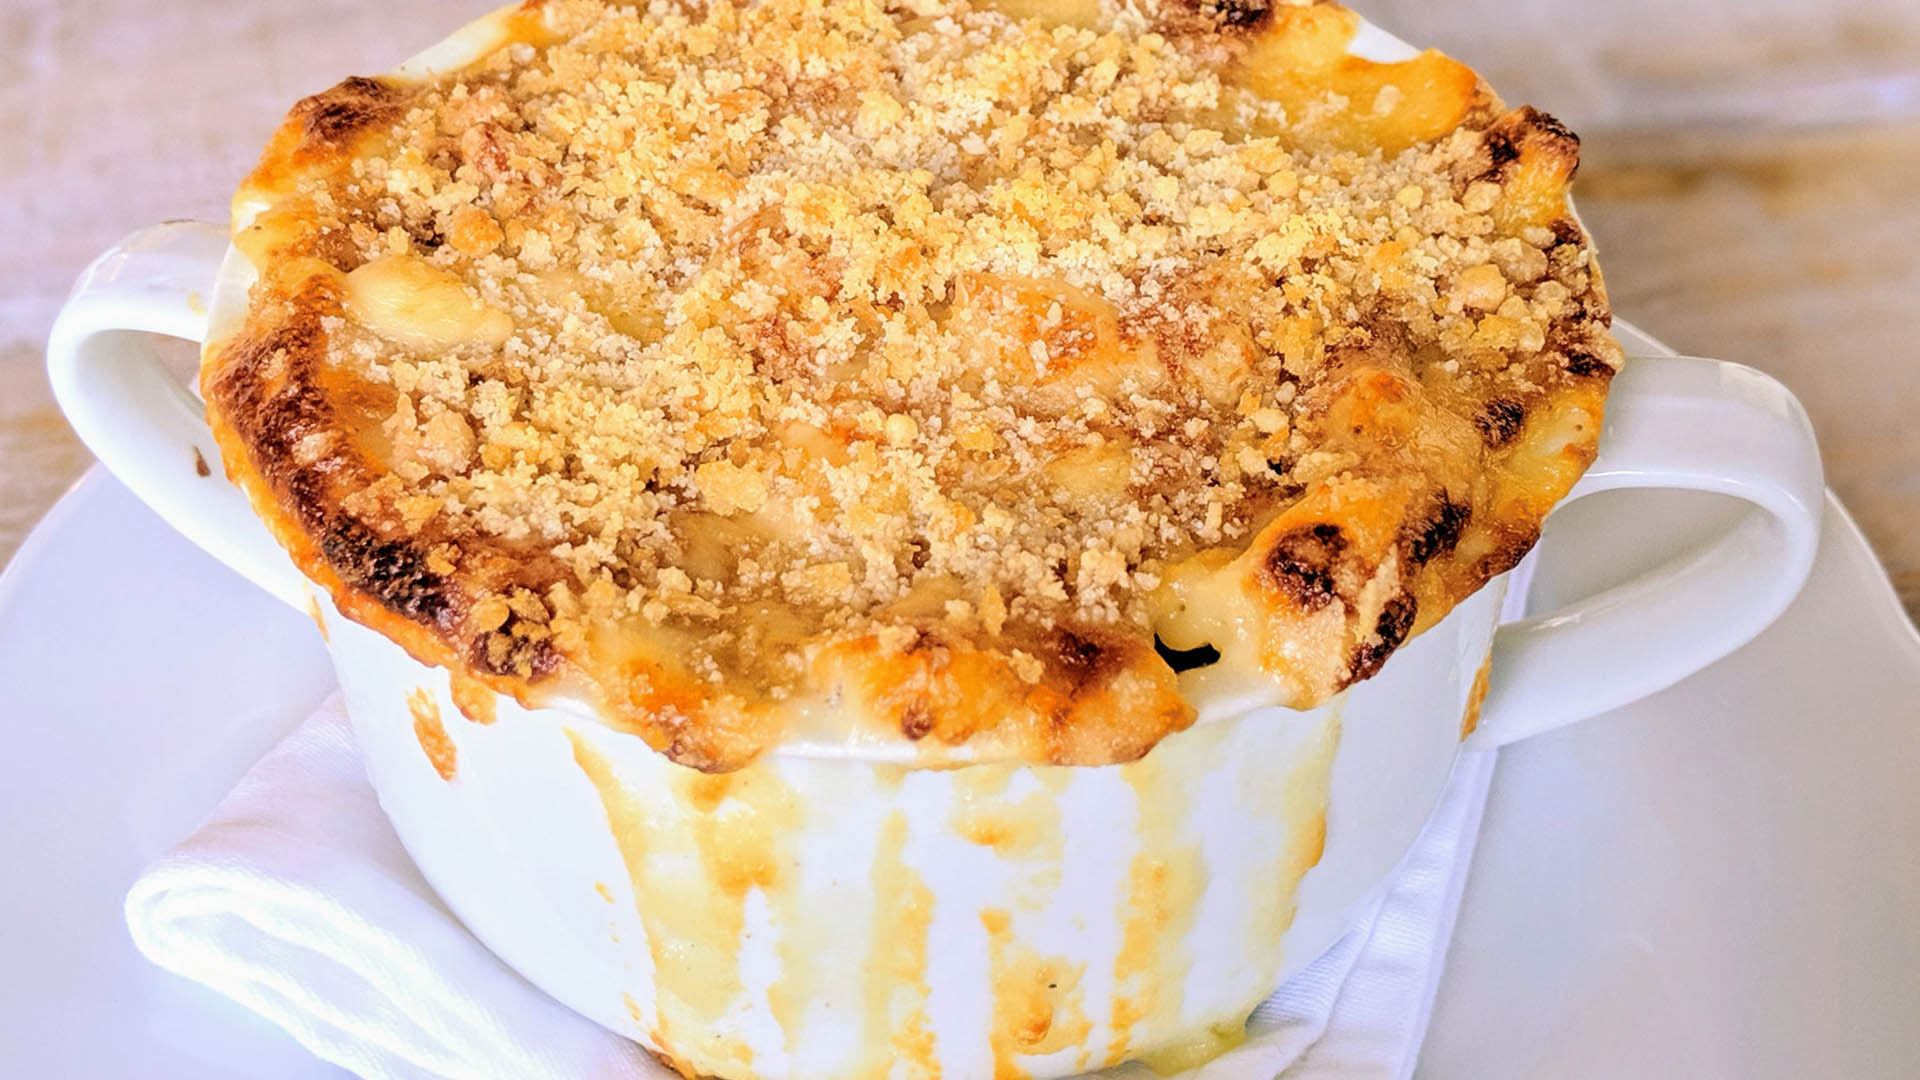 Baked mac and cheese in small round white dish.